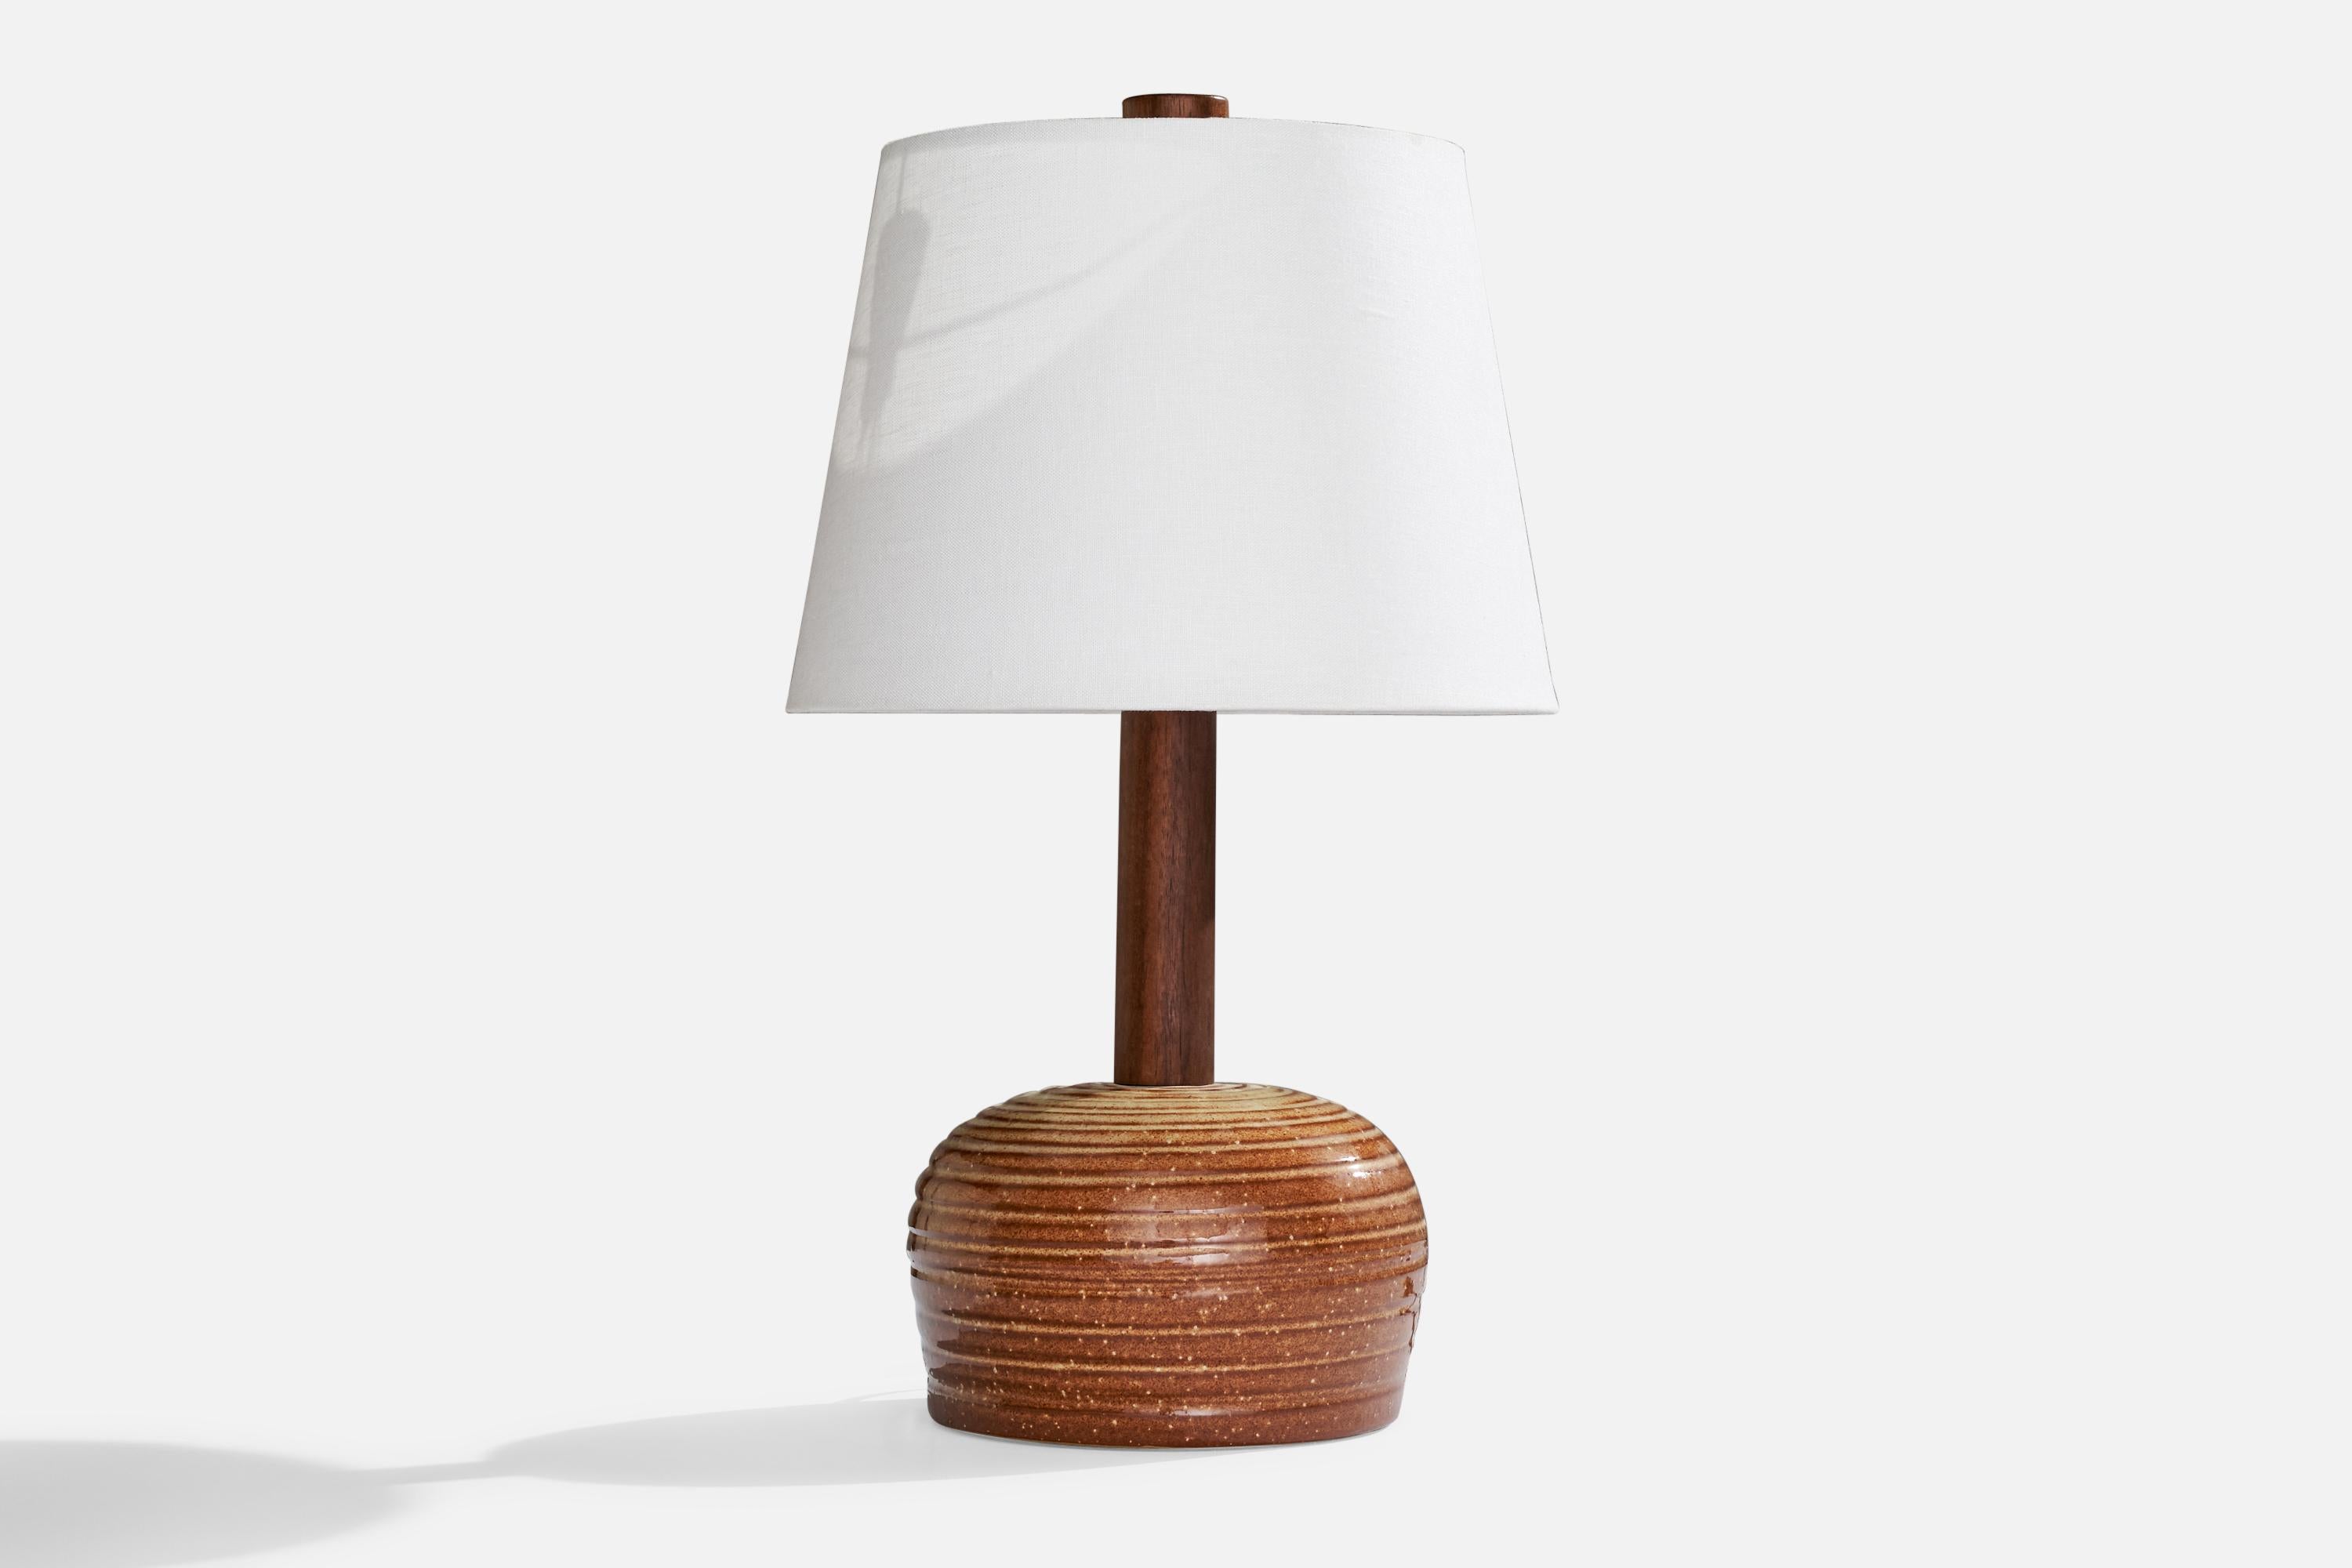 A brown red-glazed ceramic and walnut table lamp designed by Jane & Gordon Martz and produced by Marshall Studios, USA, 1960s.

Dimensions of Lamp (inches): 14” H x 8” Diameter
Dimensions of Shade (inches): 9”  Top Diameter x 12” Bottom Diameter x